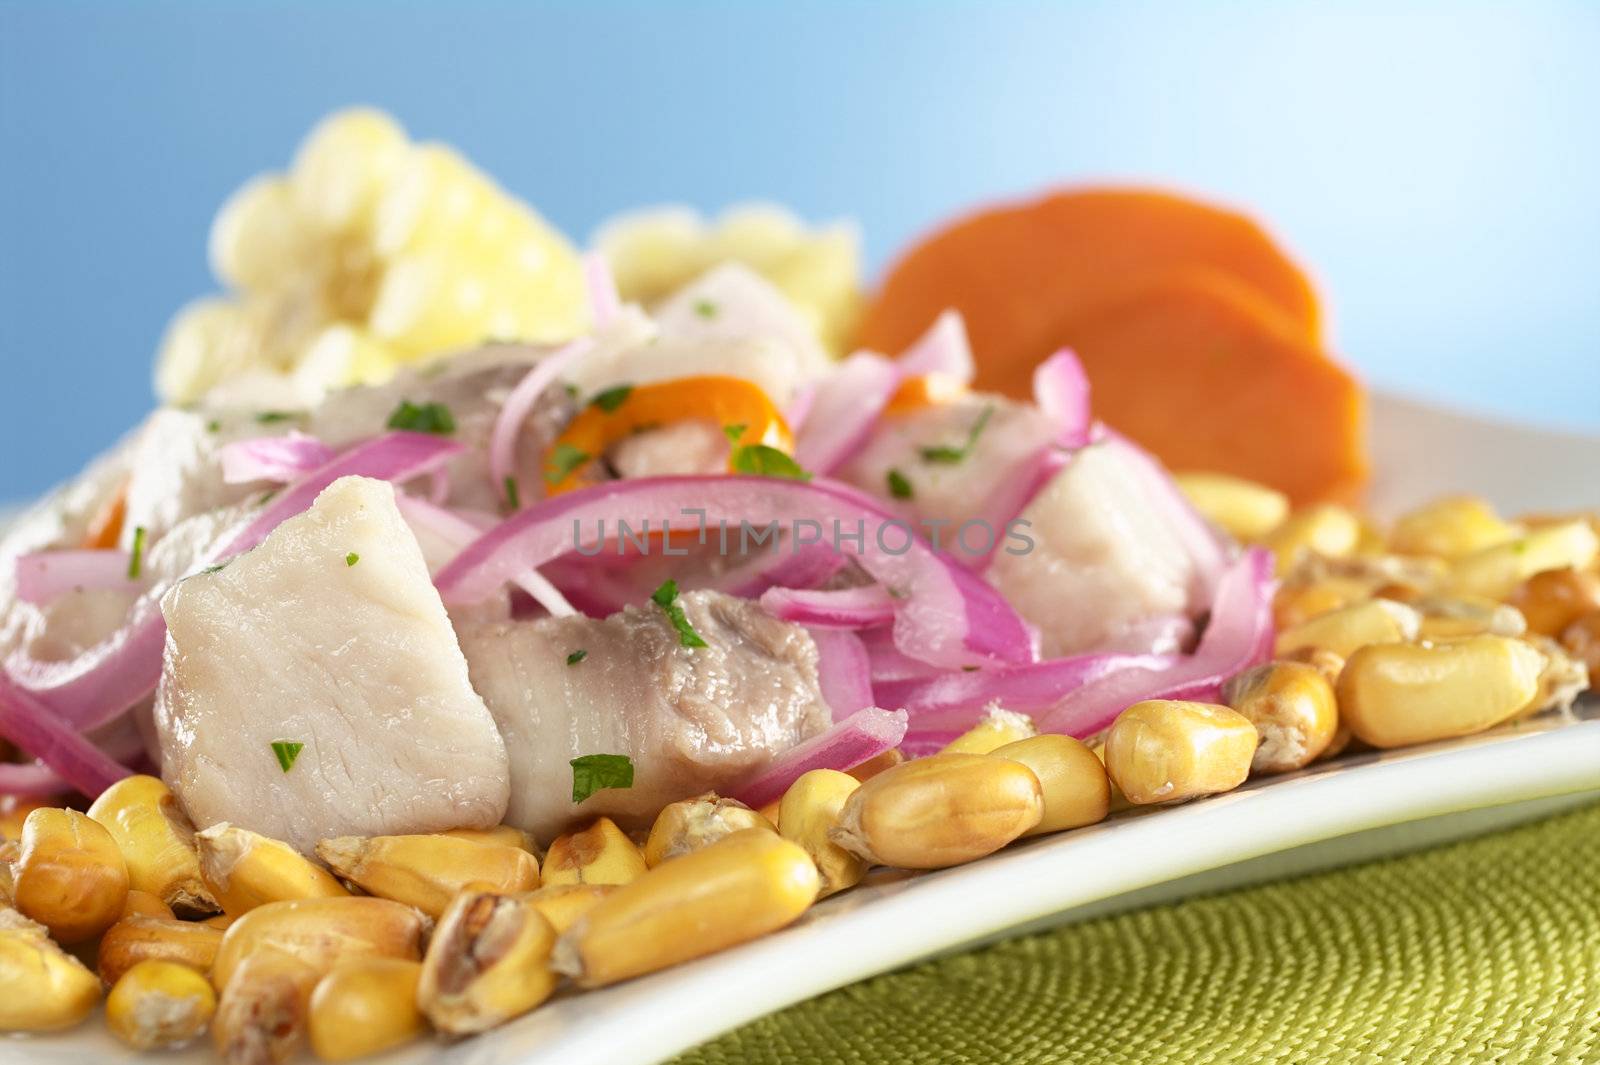 Peruvian-style ceviche made out of raw mahi-mahi fish (Spanish: perico), red onions and aji (Peruvian hot pepper) and served with roasted corn (cancha) and cooked corn cob as well as cooked sweet potato (Selective Focus, Focus on the fish on the left)